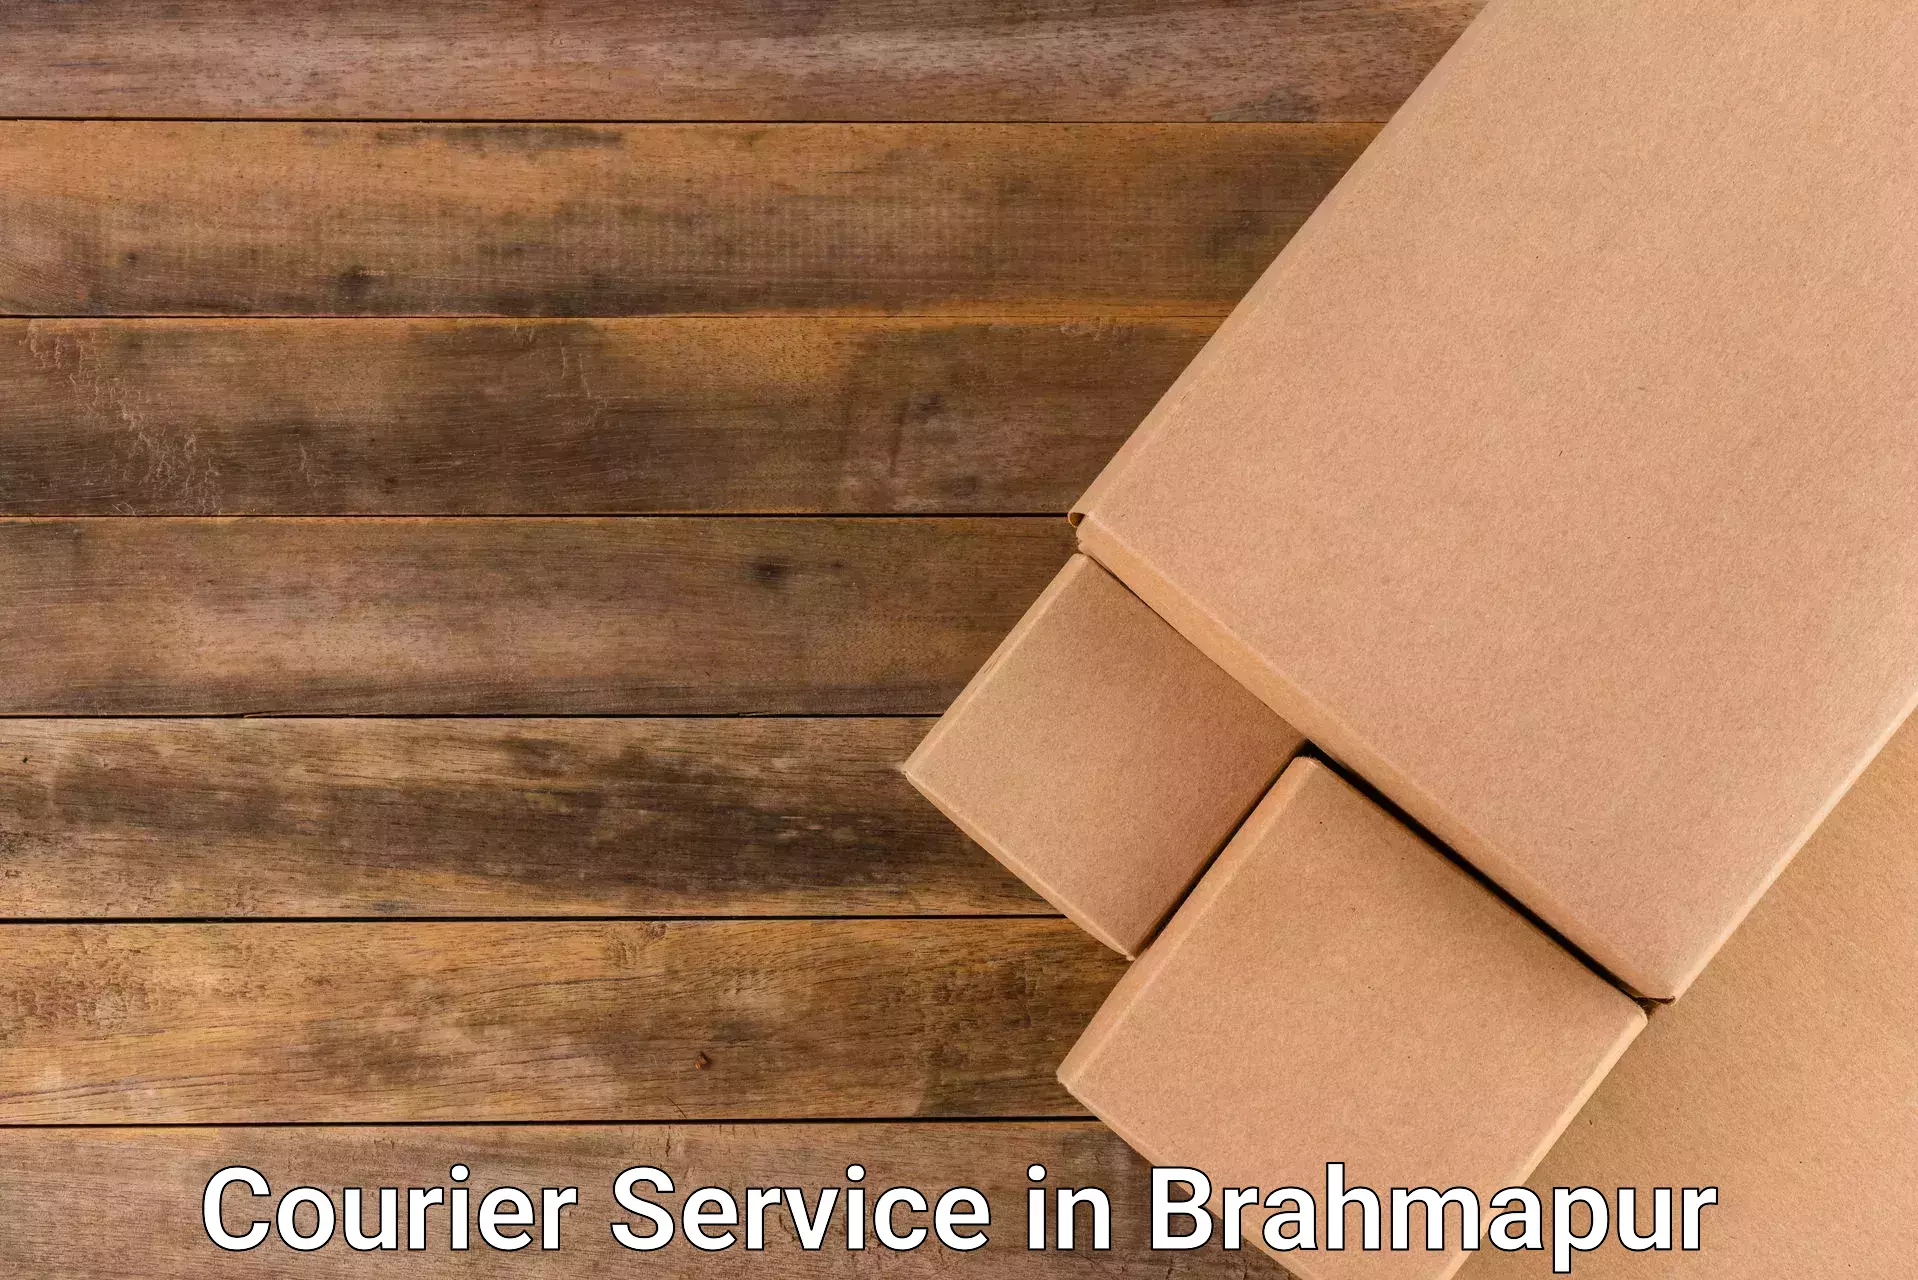 Enhanced tracking features in Brahmapur